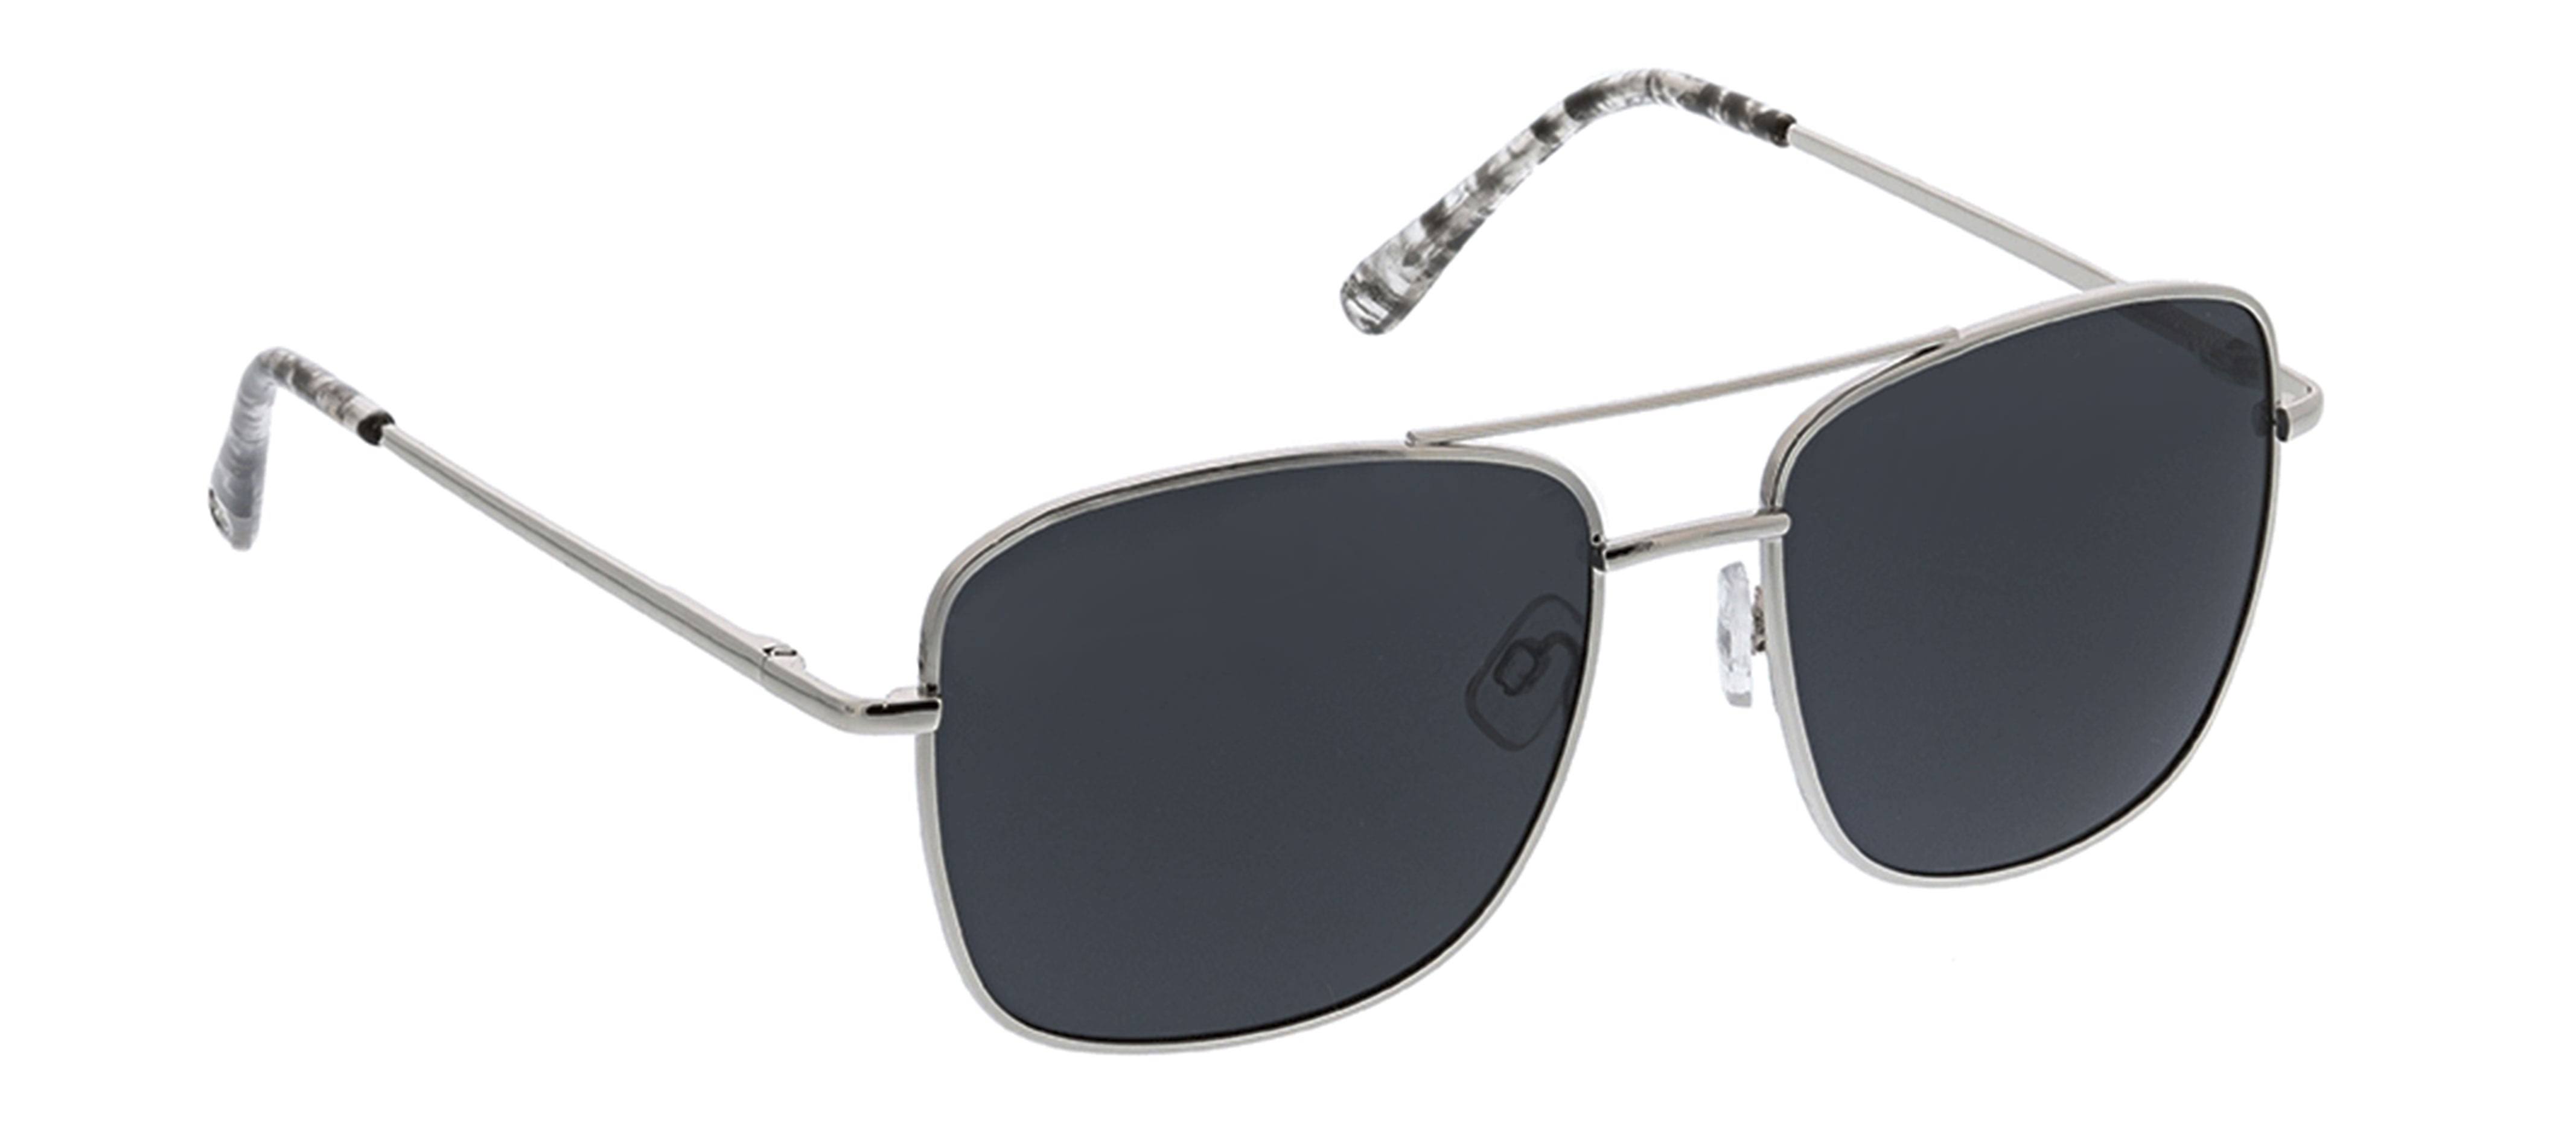 Peepers by PeeperSpecs Big sur Aviator Reading Sunglasses, Silver, 56